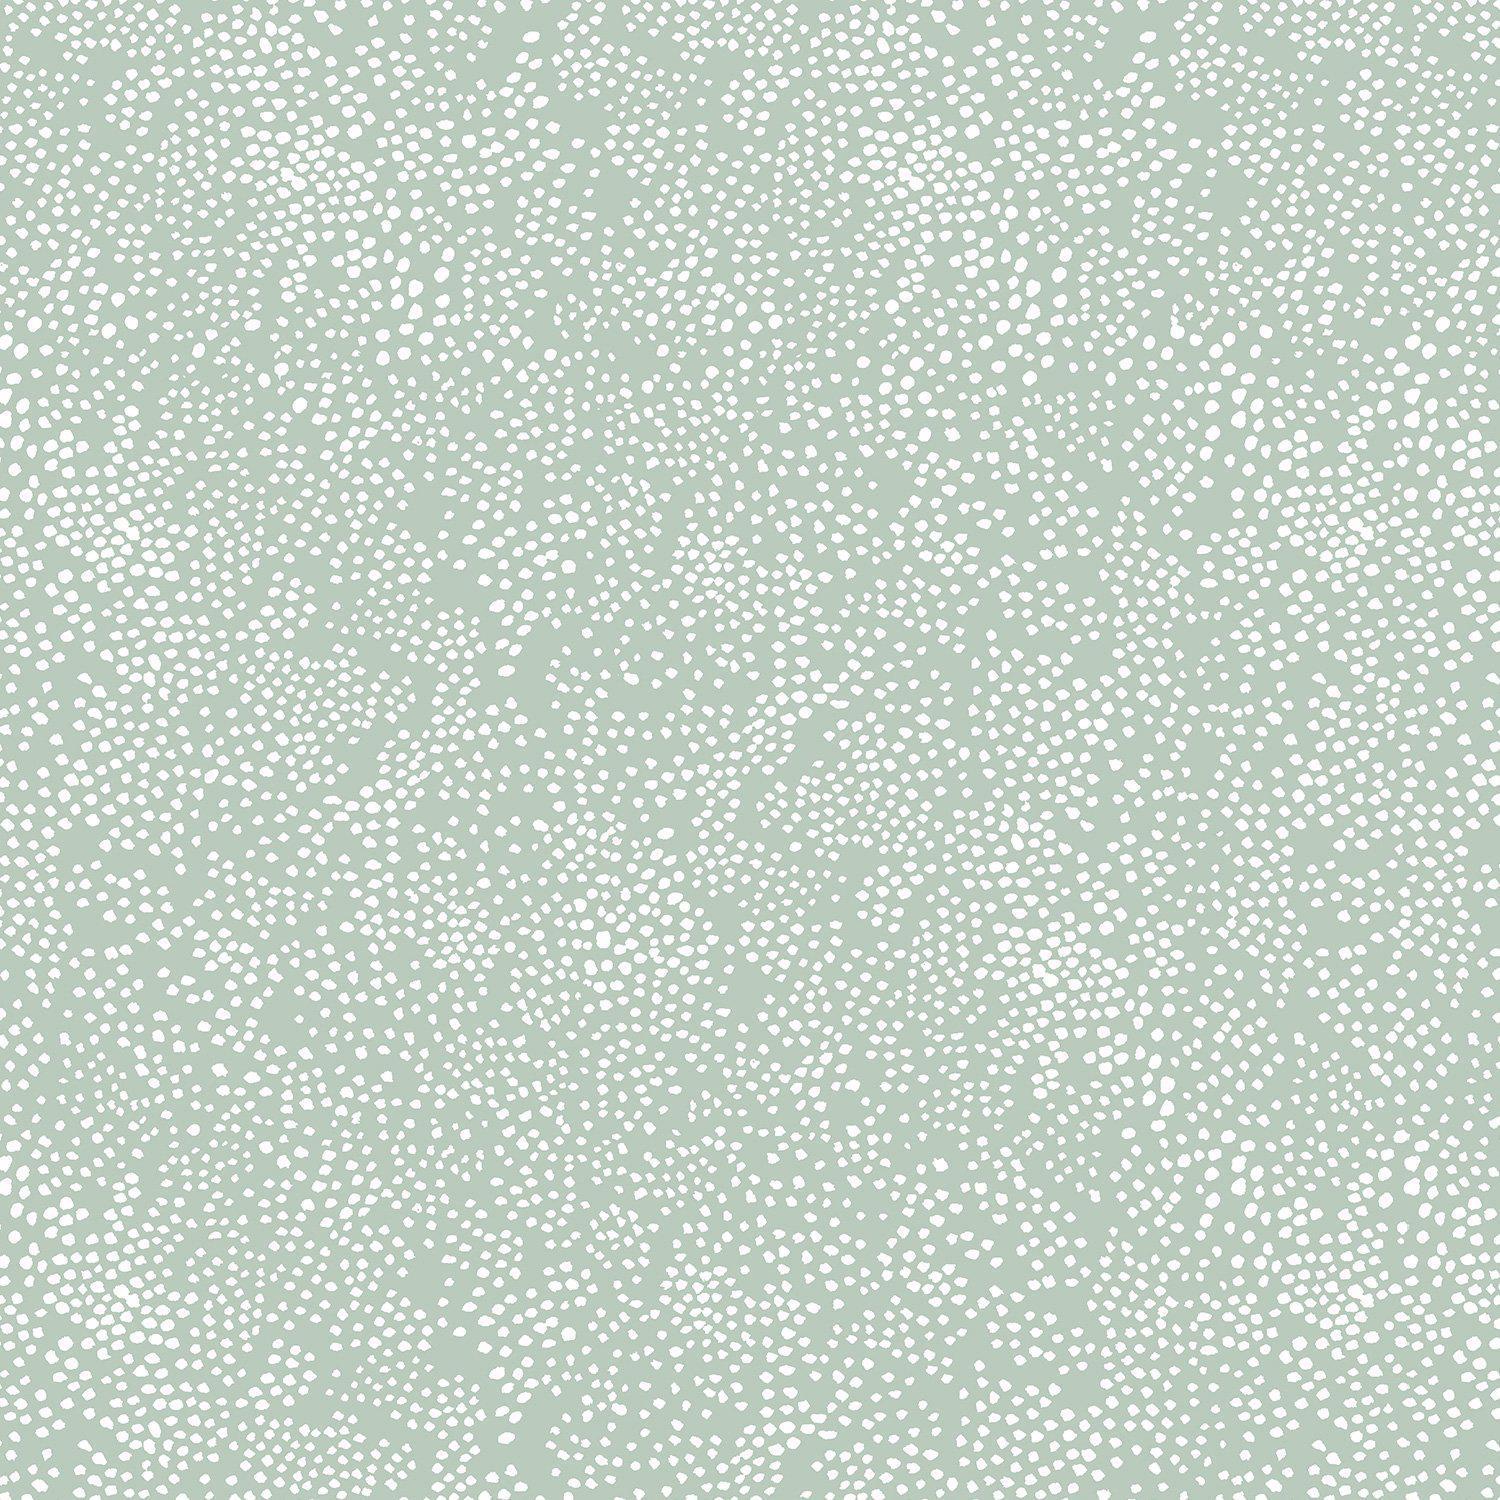 Cotton + Steel-REMNANT: Menagerie Champagne Mint 30% OFF 1.5 YDS-fabric remnant-gather here online